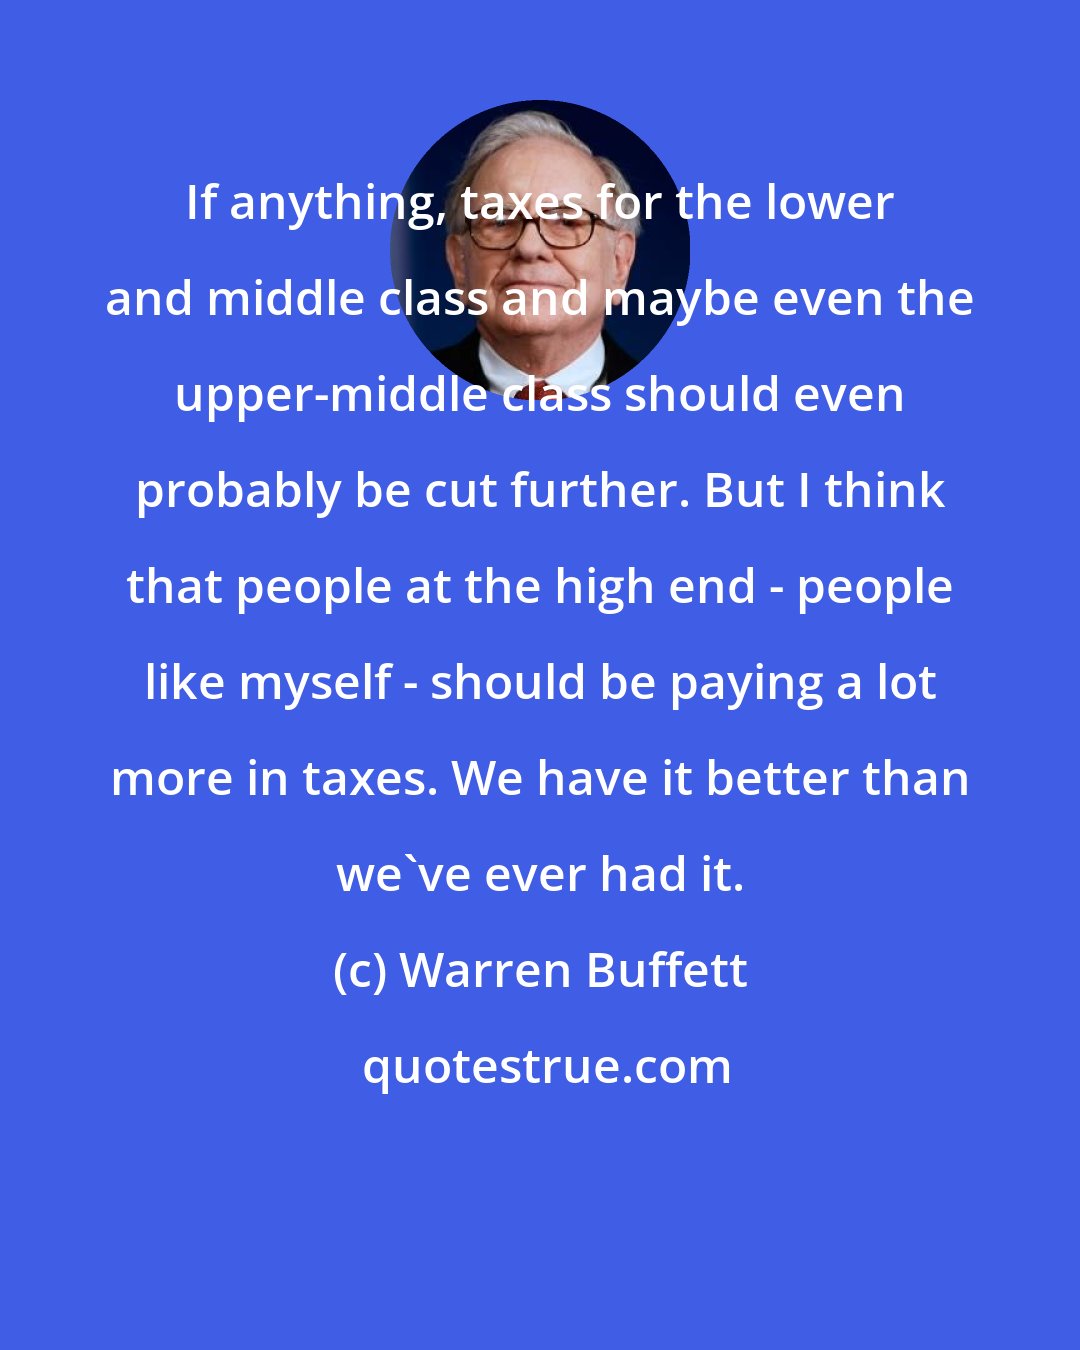 Warren Buffett: If anything, taxes for the lower and middle class and maybe even the upper-middle class should even probably be cut further. But I think that people at the high end - people like myself - should be paying a lot more in taxes. We have it better than we've ever had it.